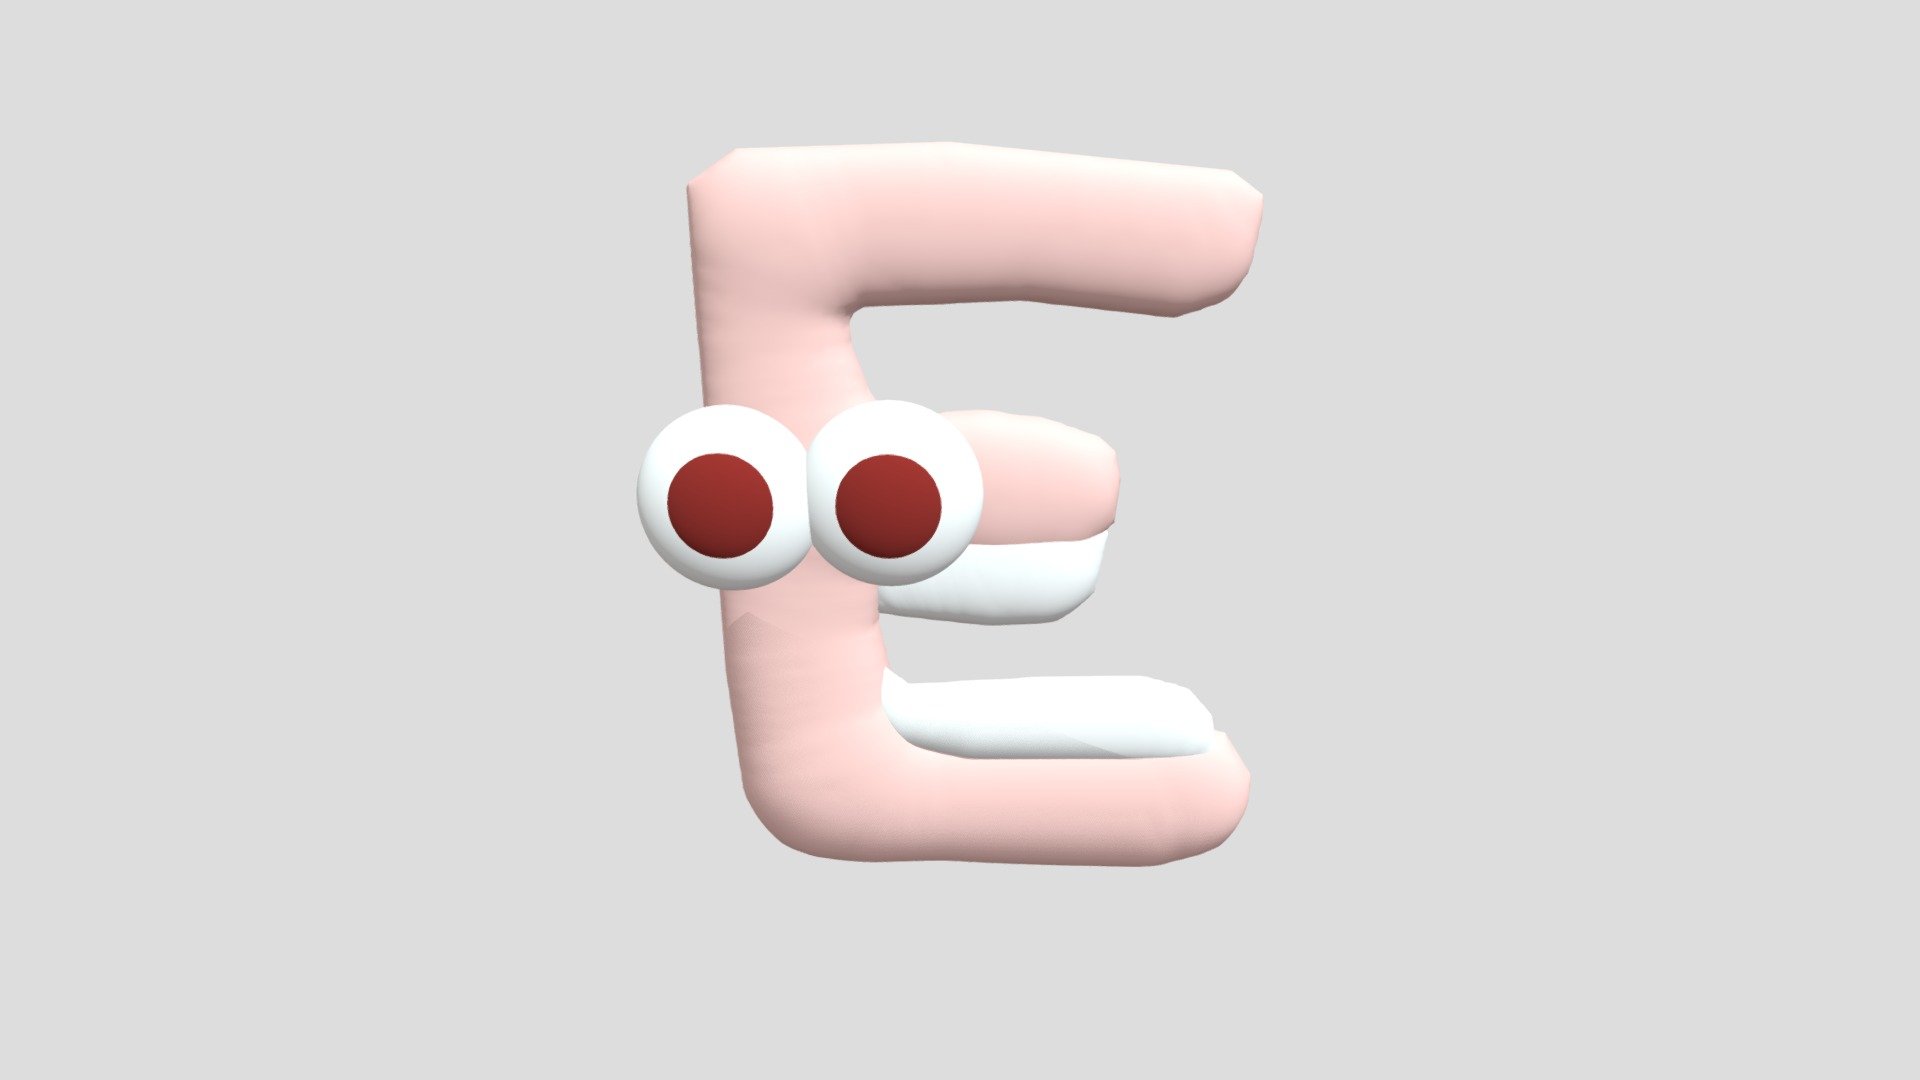 Spanish L (Spanish Alphabet Lore) - Download Free 3D model by aniandronic  (@aniandronic) [0981295]